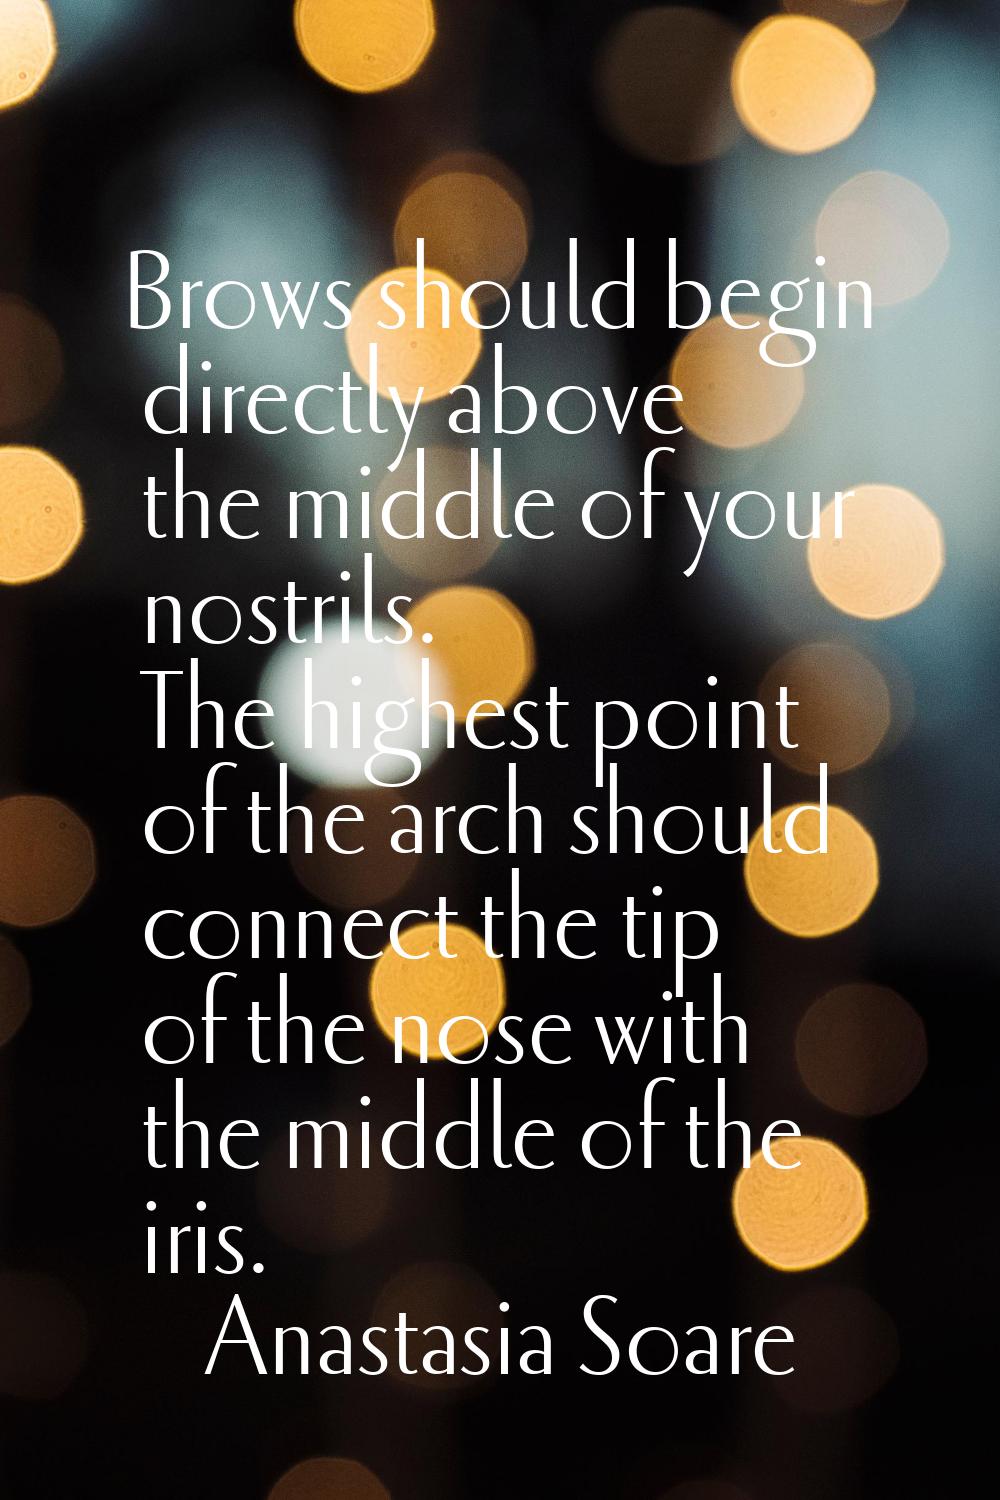 Brows should begin directly above the middle of your nostrils. The highest point of the arch should